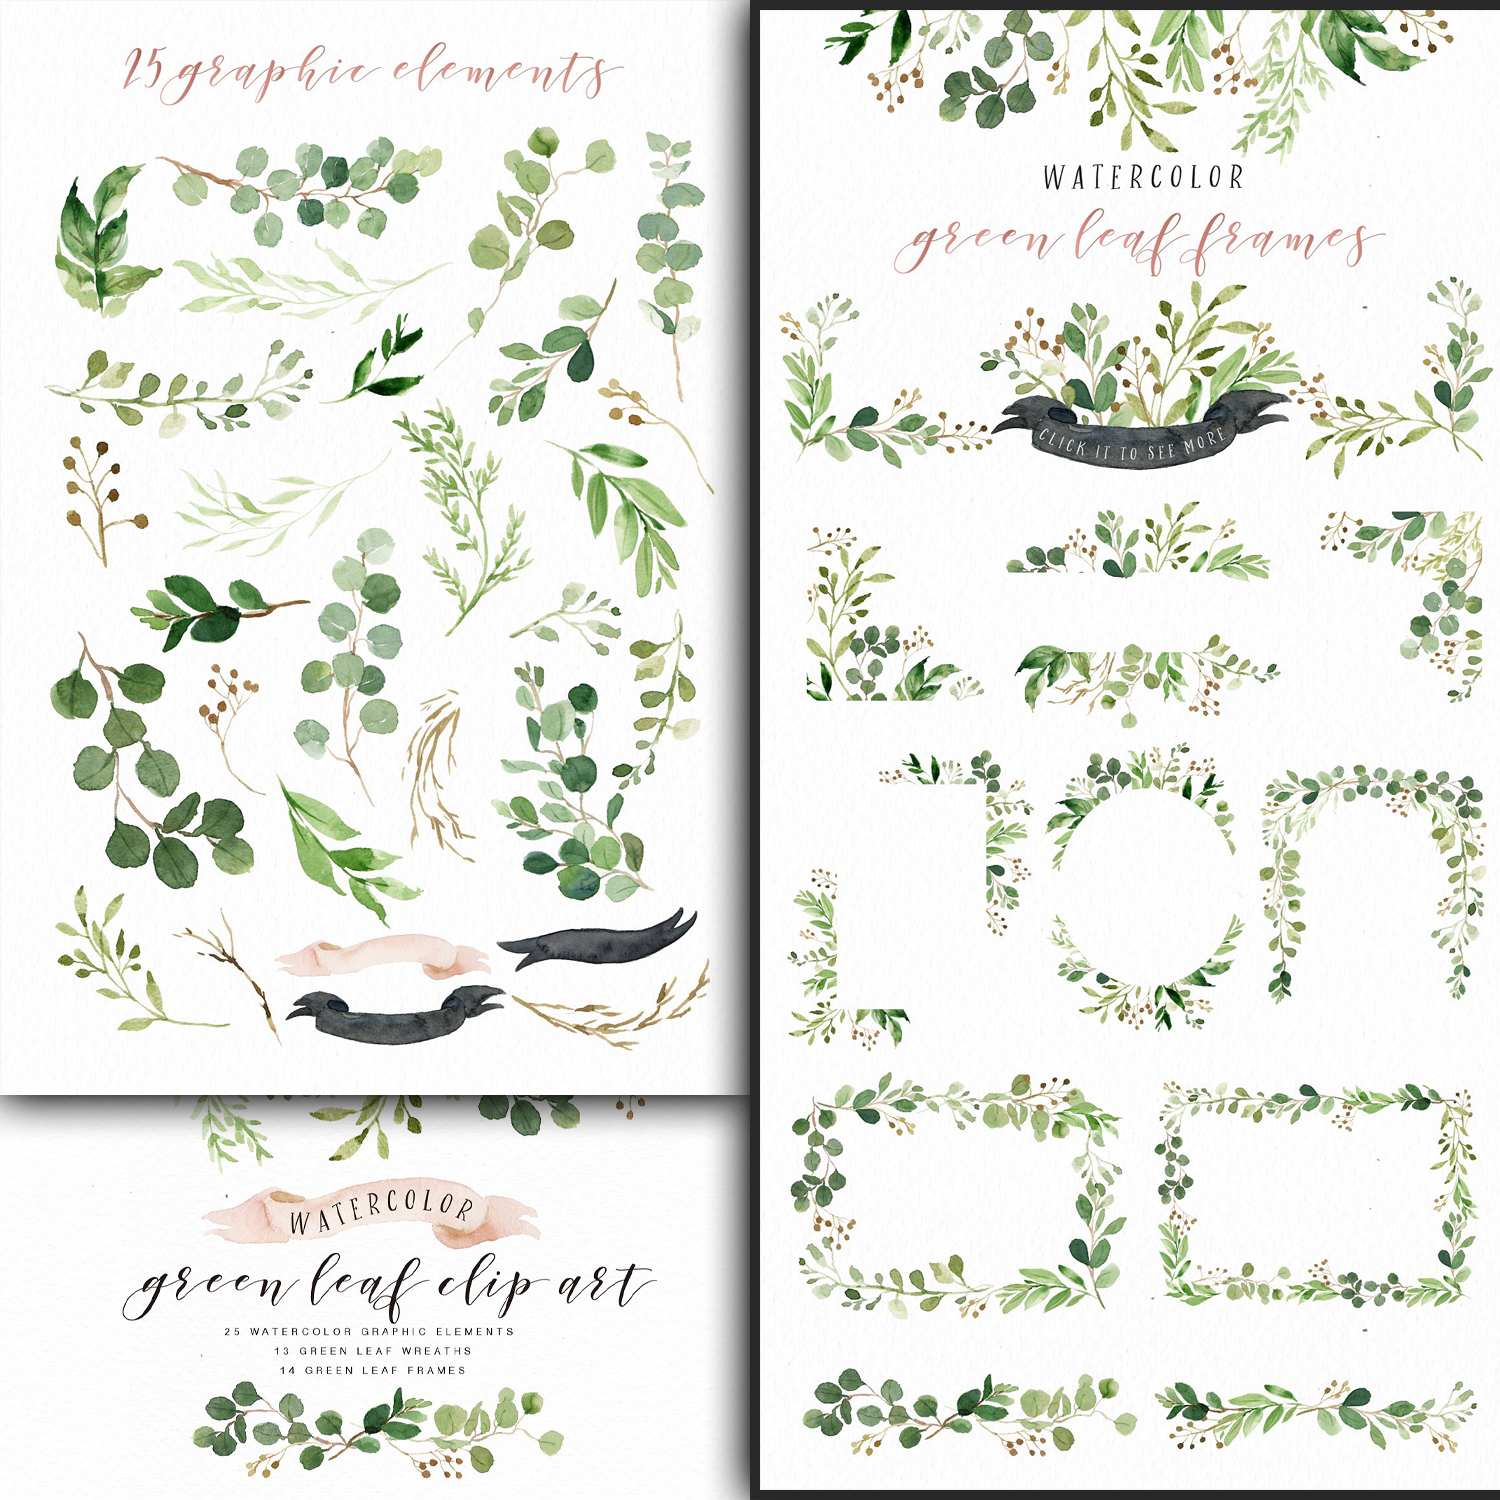 Images with watercolor green leaf clip art.